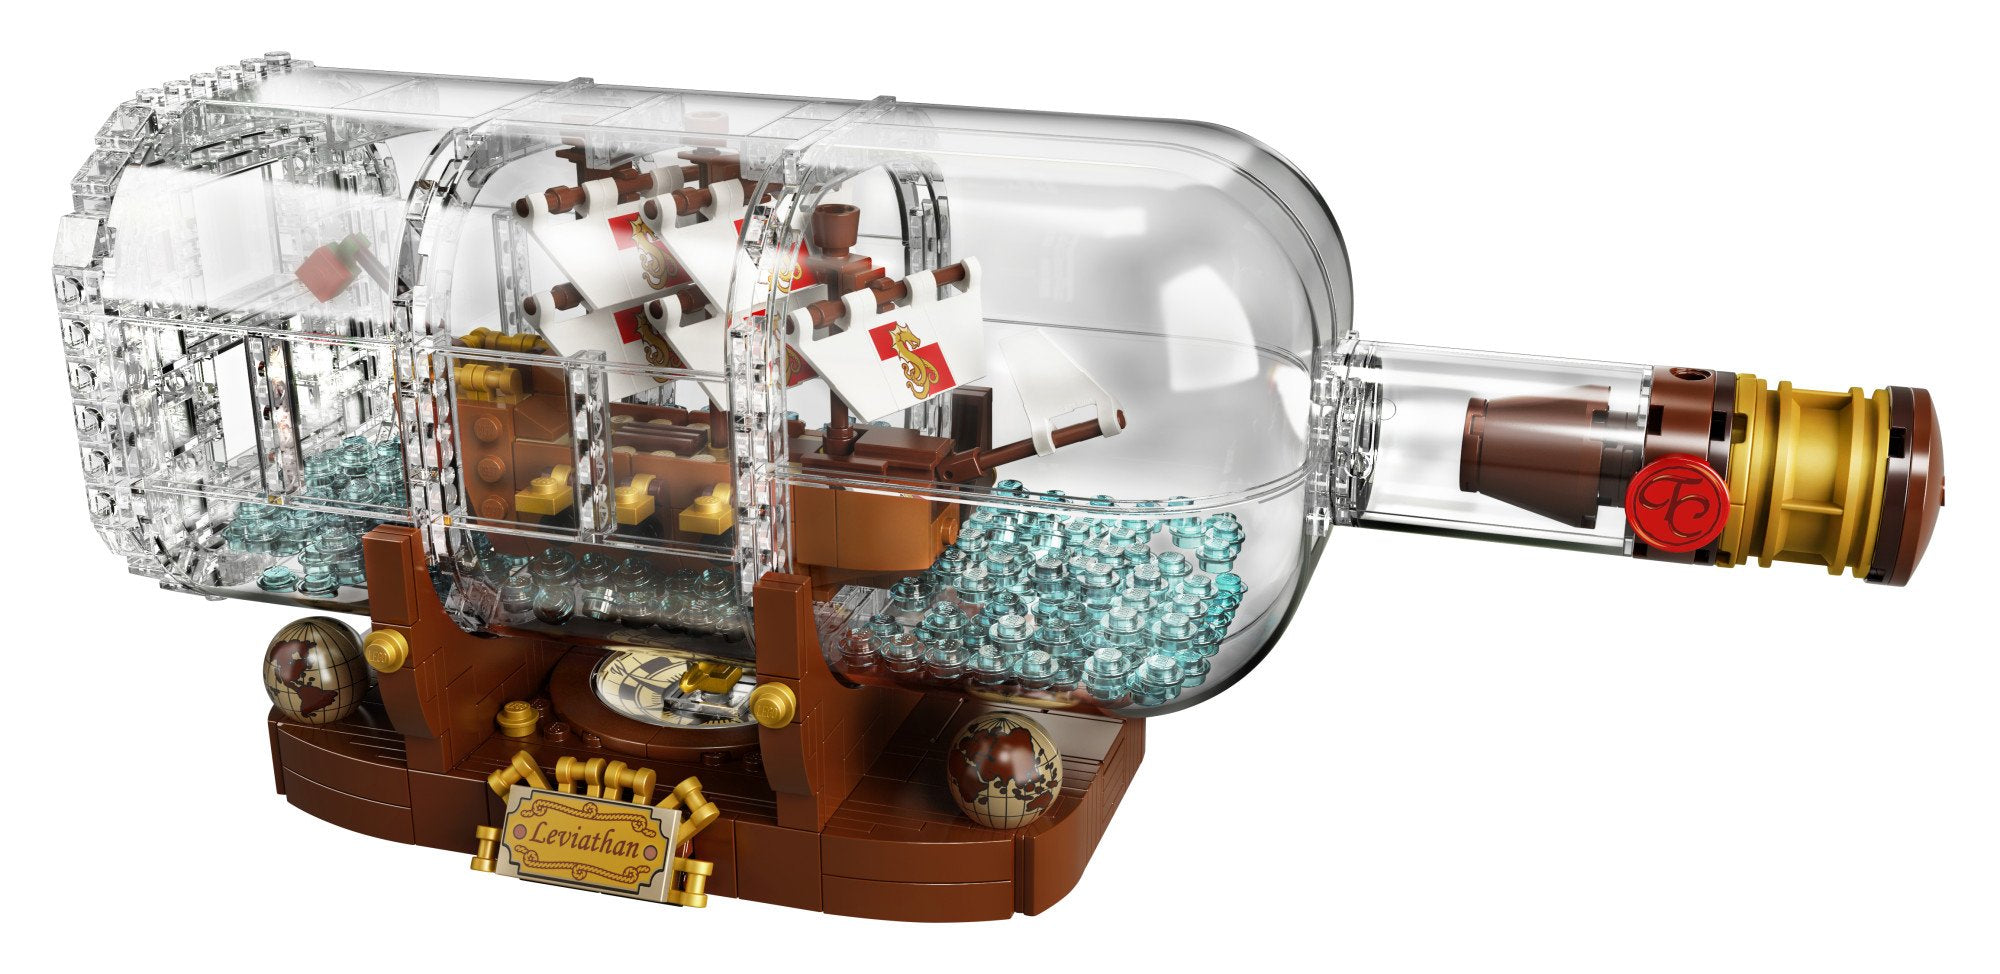 Lego IDEAS 21313 Ship in a Bottle Building Kit (962 pieces) (Like New, Open Box)